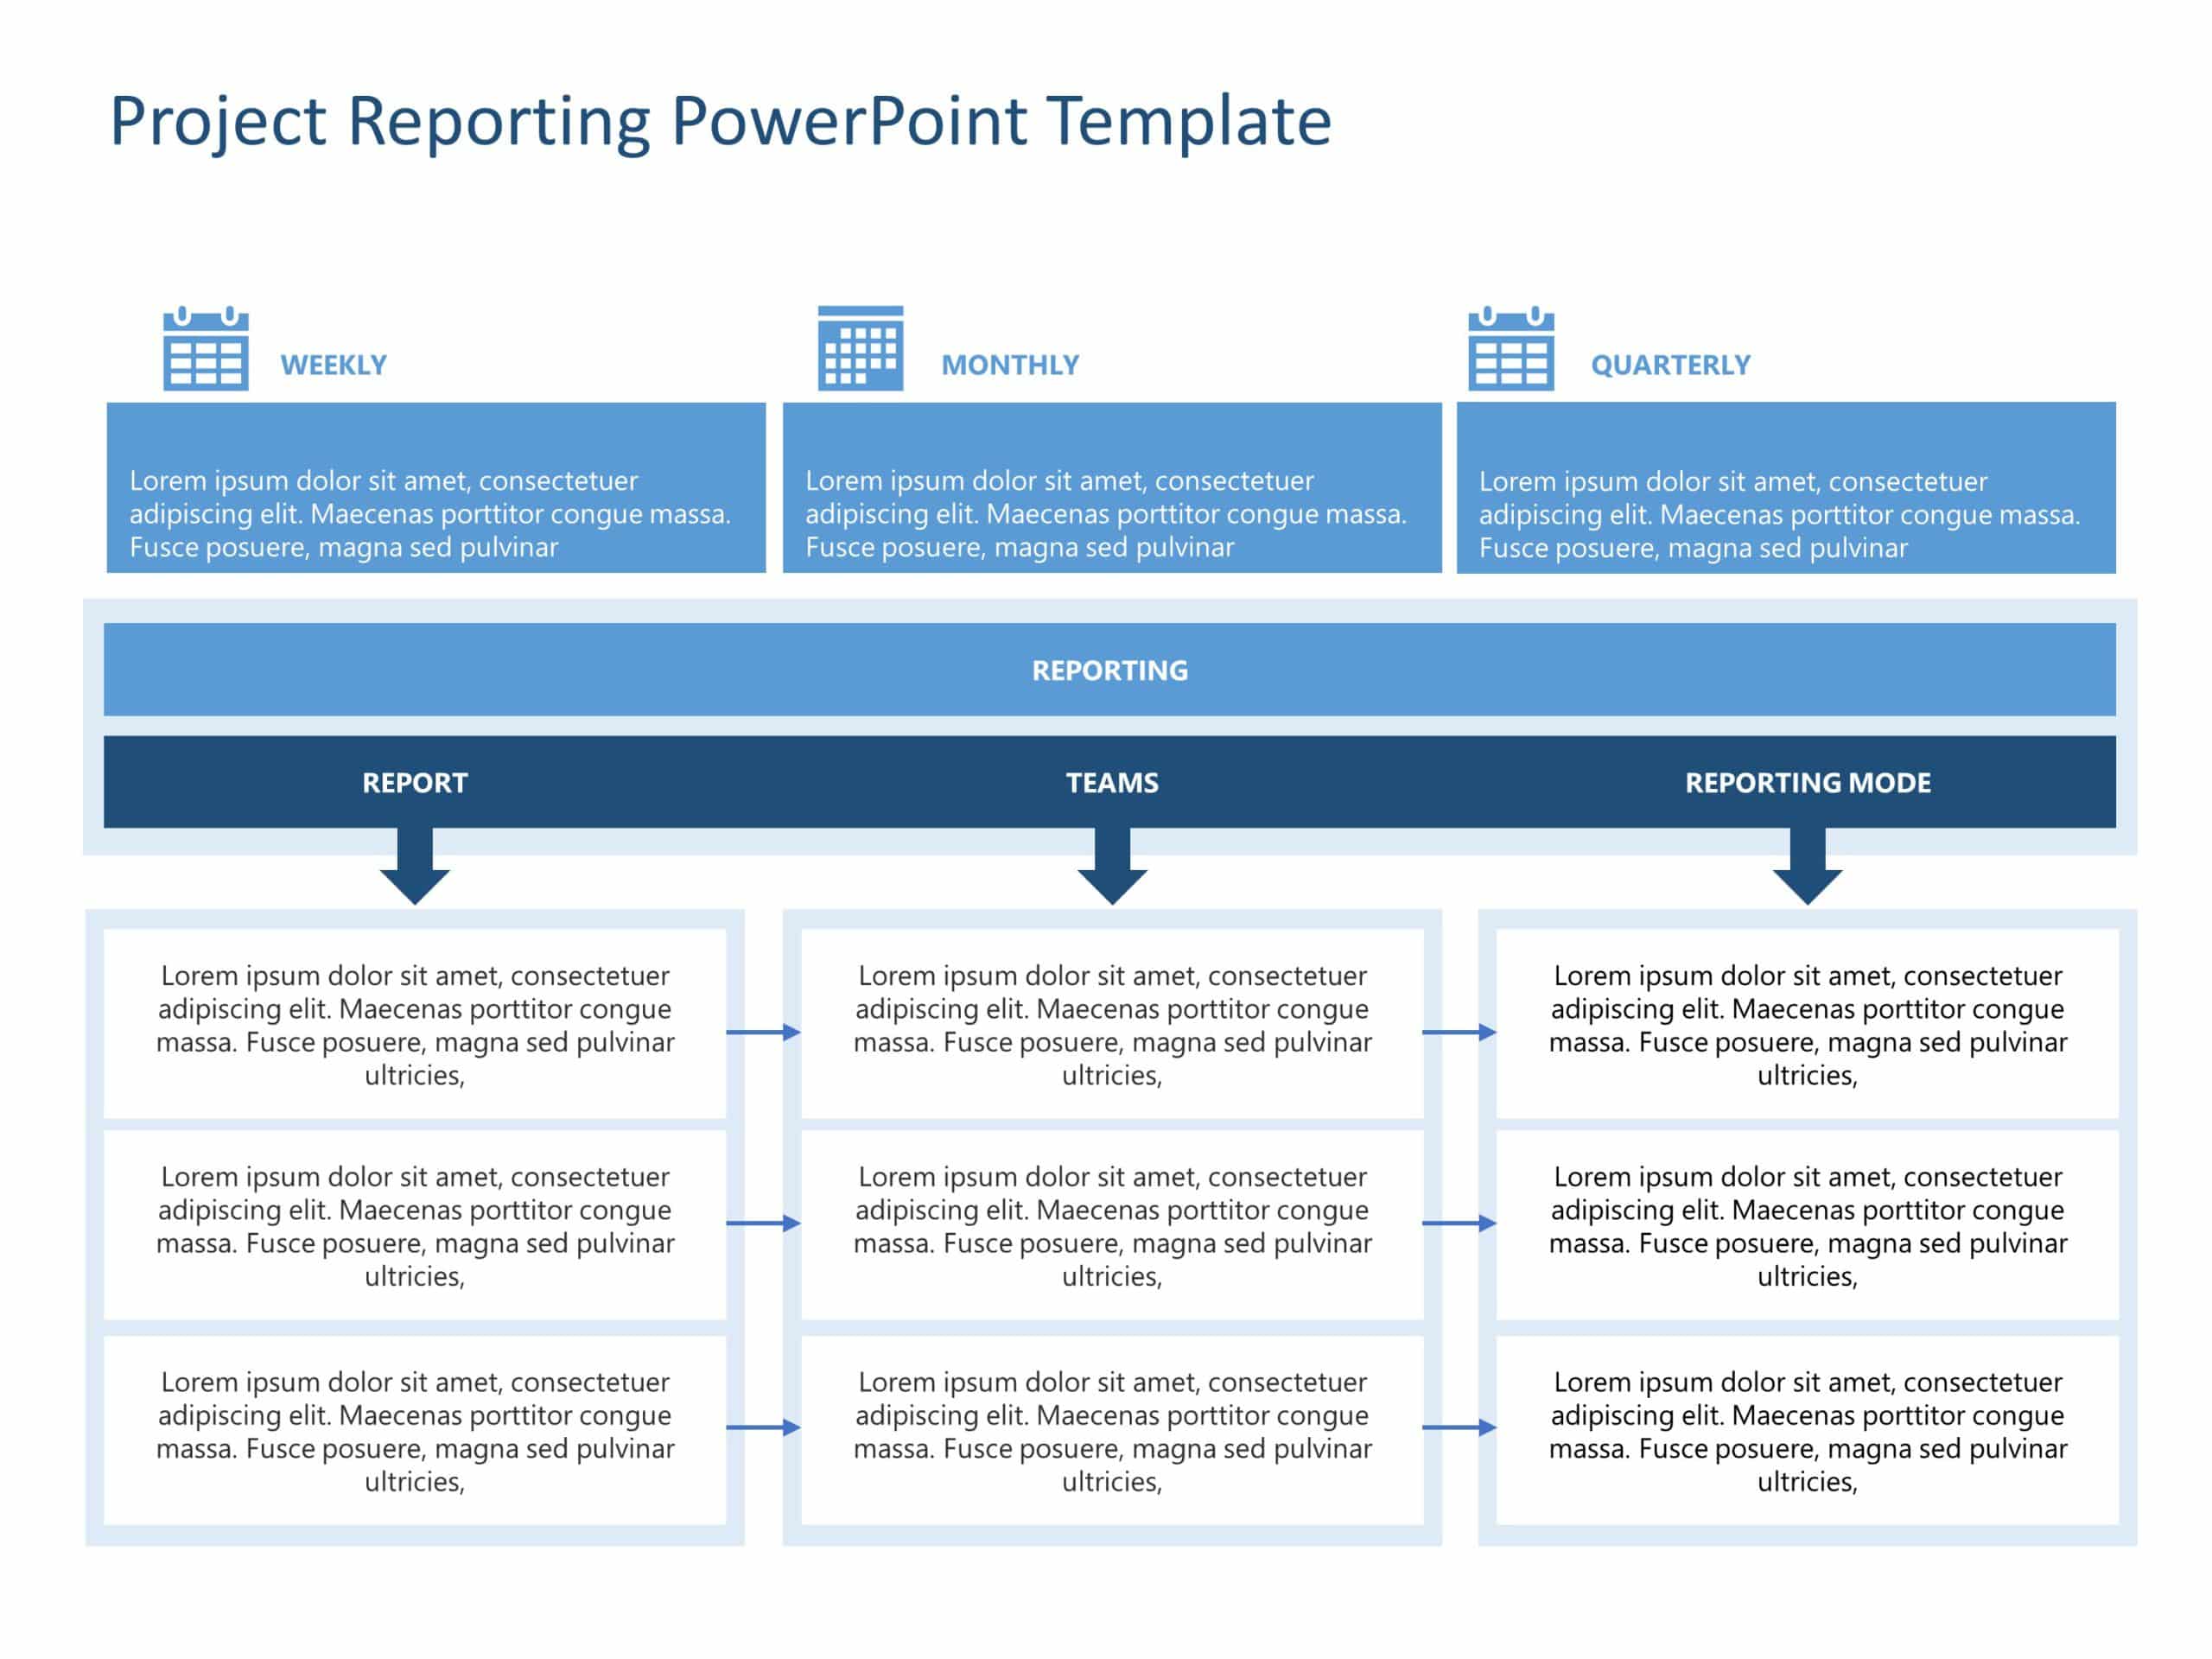 Project Reporting PowerPoint Template